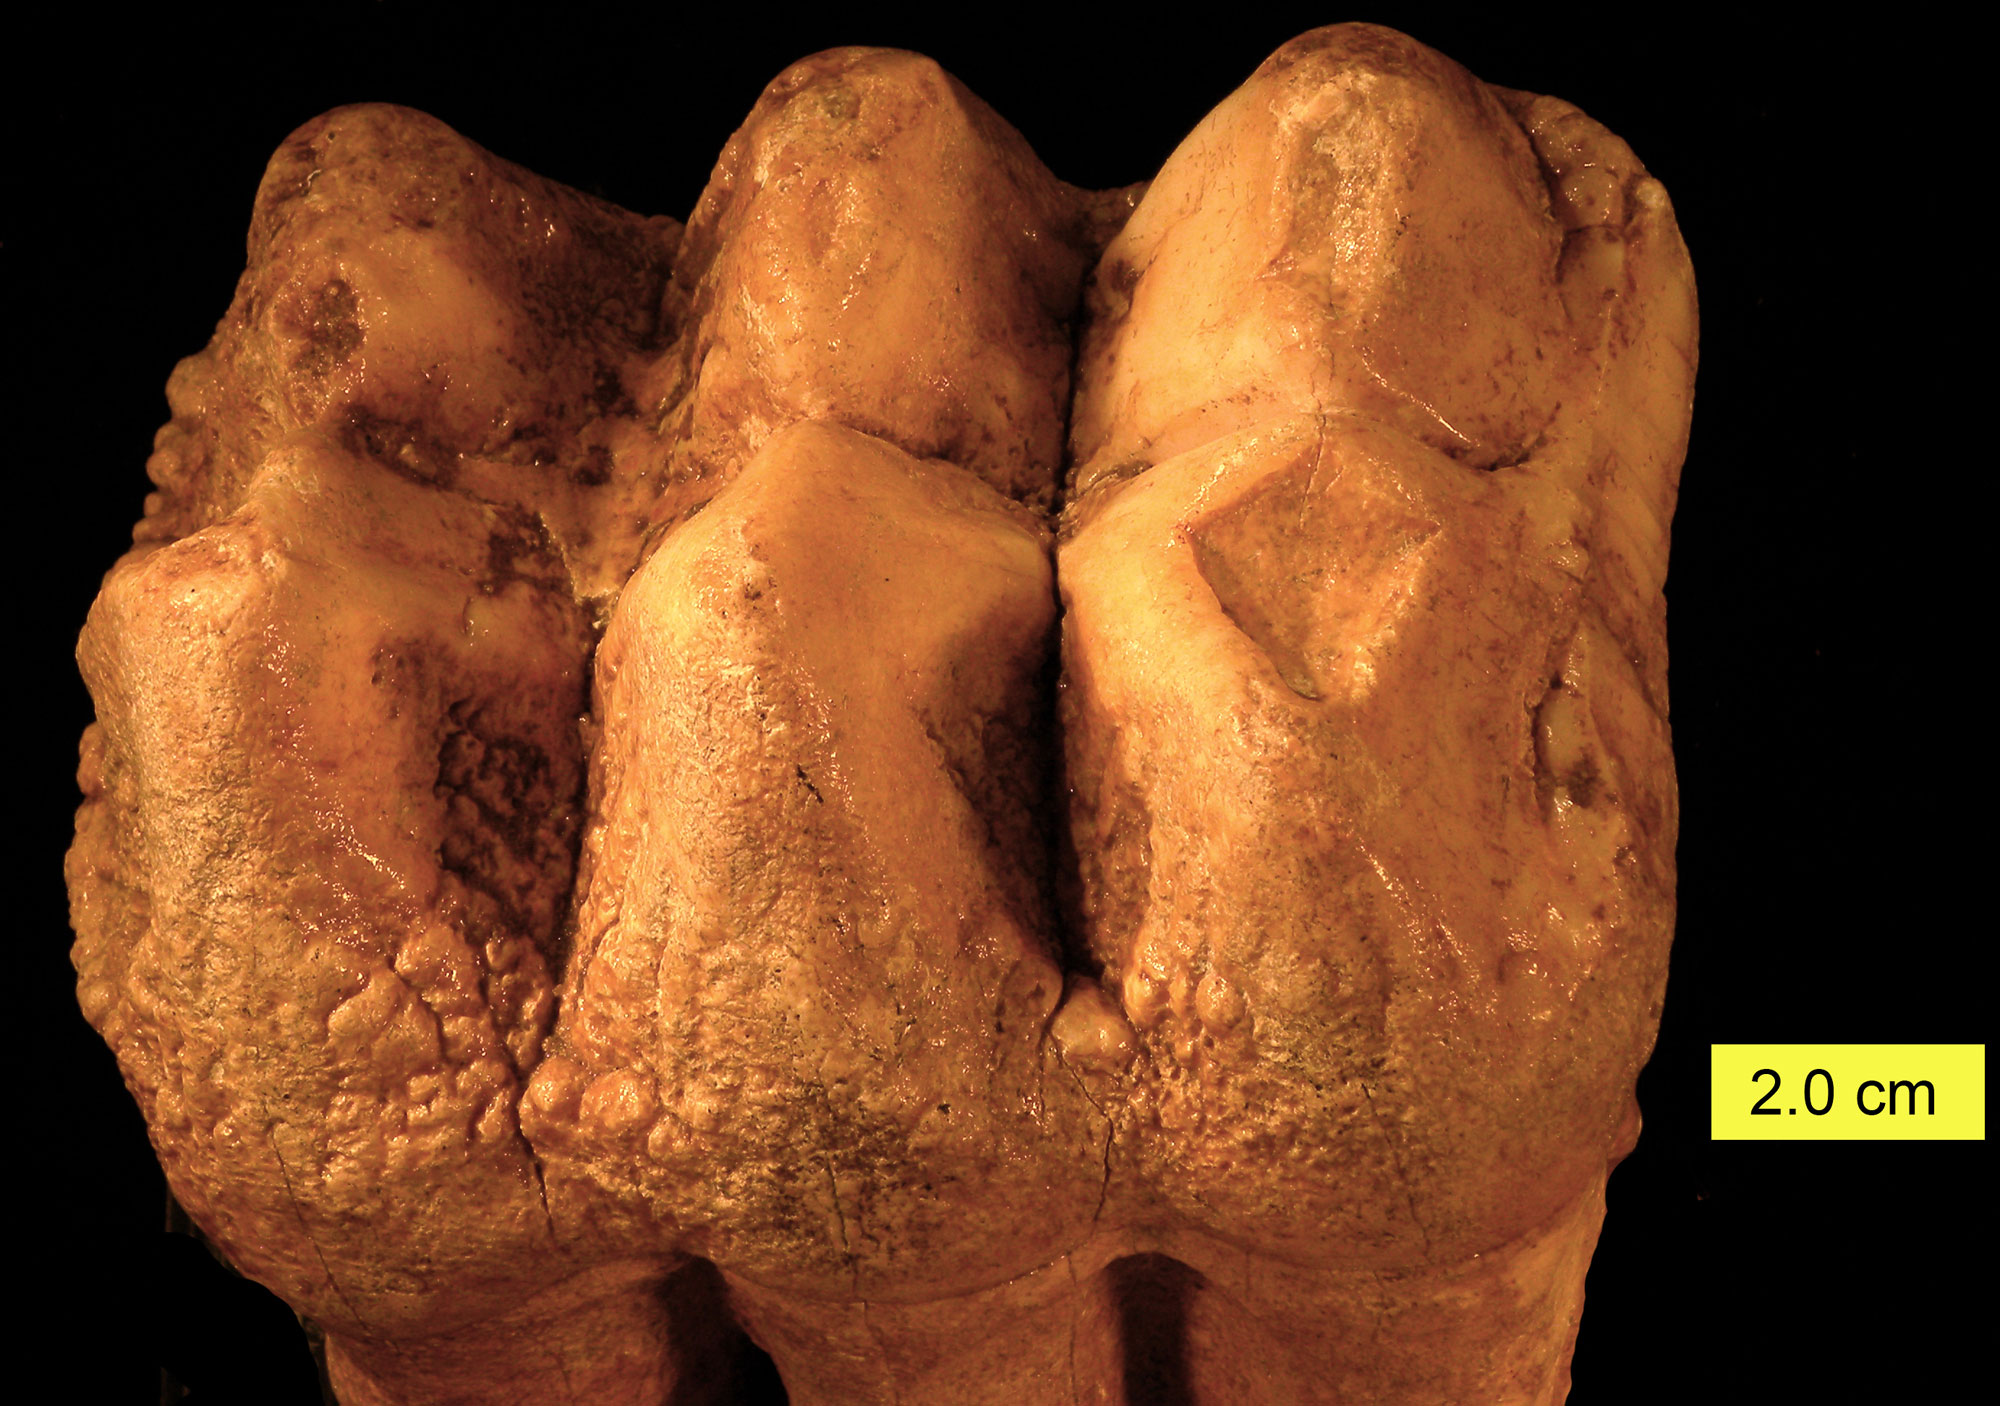 Photograph of a mastodon tooth from the Pleistocene of Ohio. The photo shows the biting surface and the upper part of the root of a single tooth. The tooth is off-white in color. The biting surface consists of three pairs of pointed cusps in a line. The root looks like it has three branches.